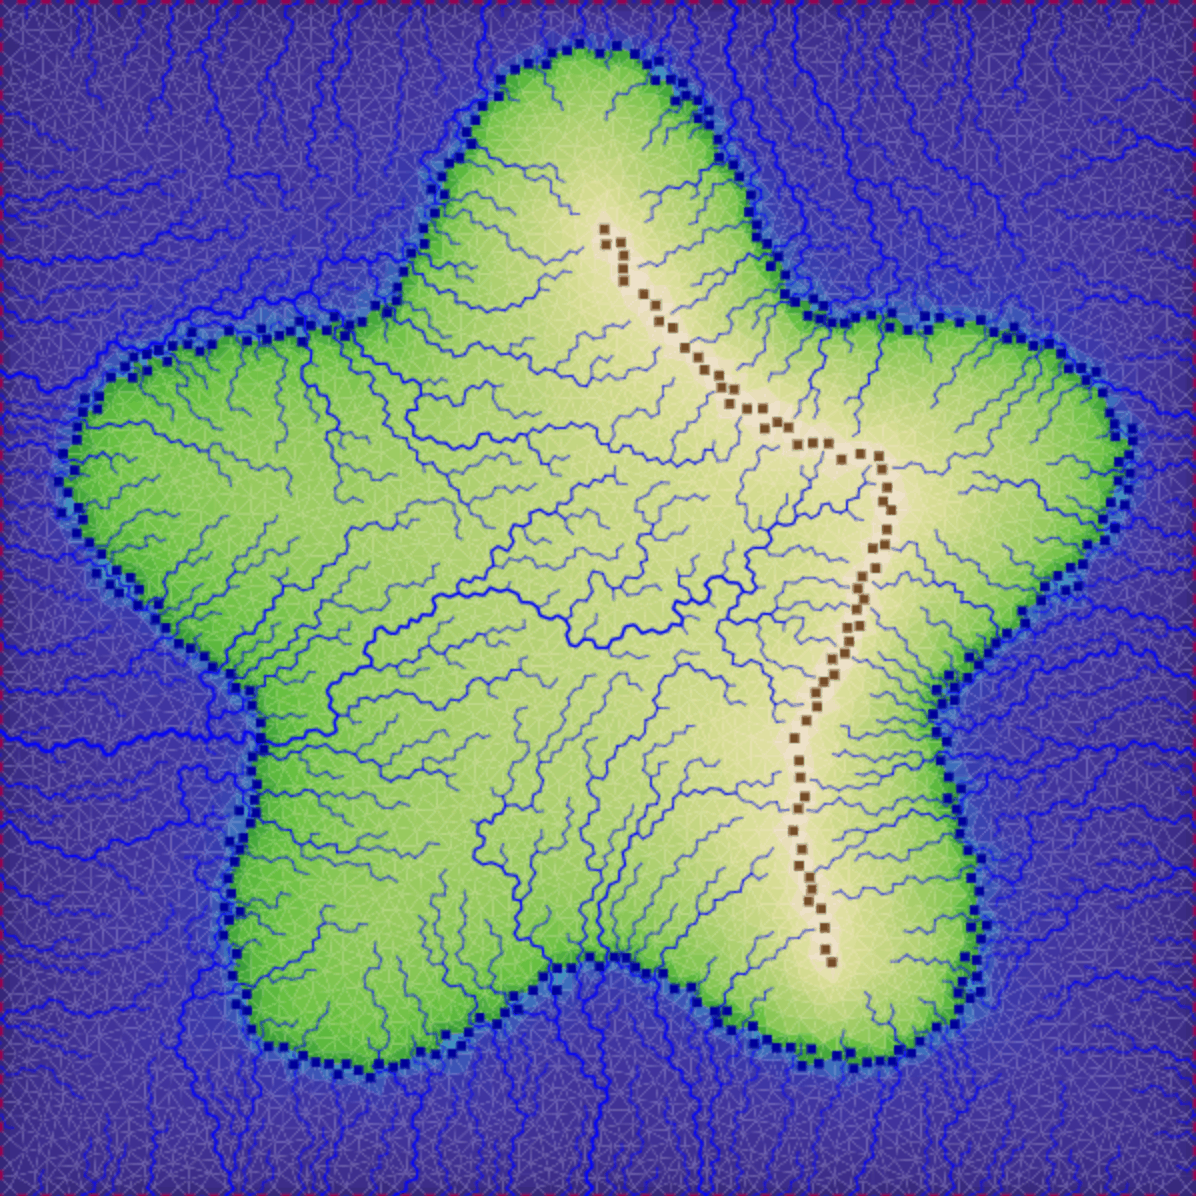 Example of generated rivers